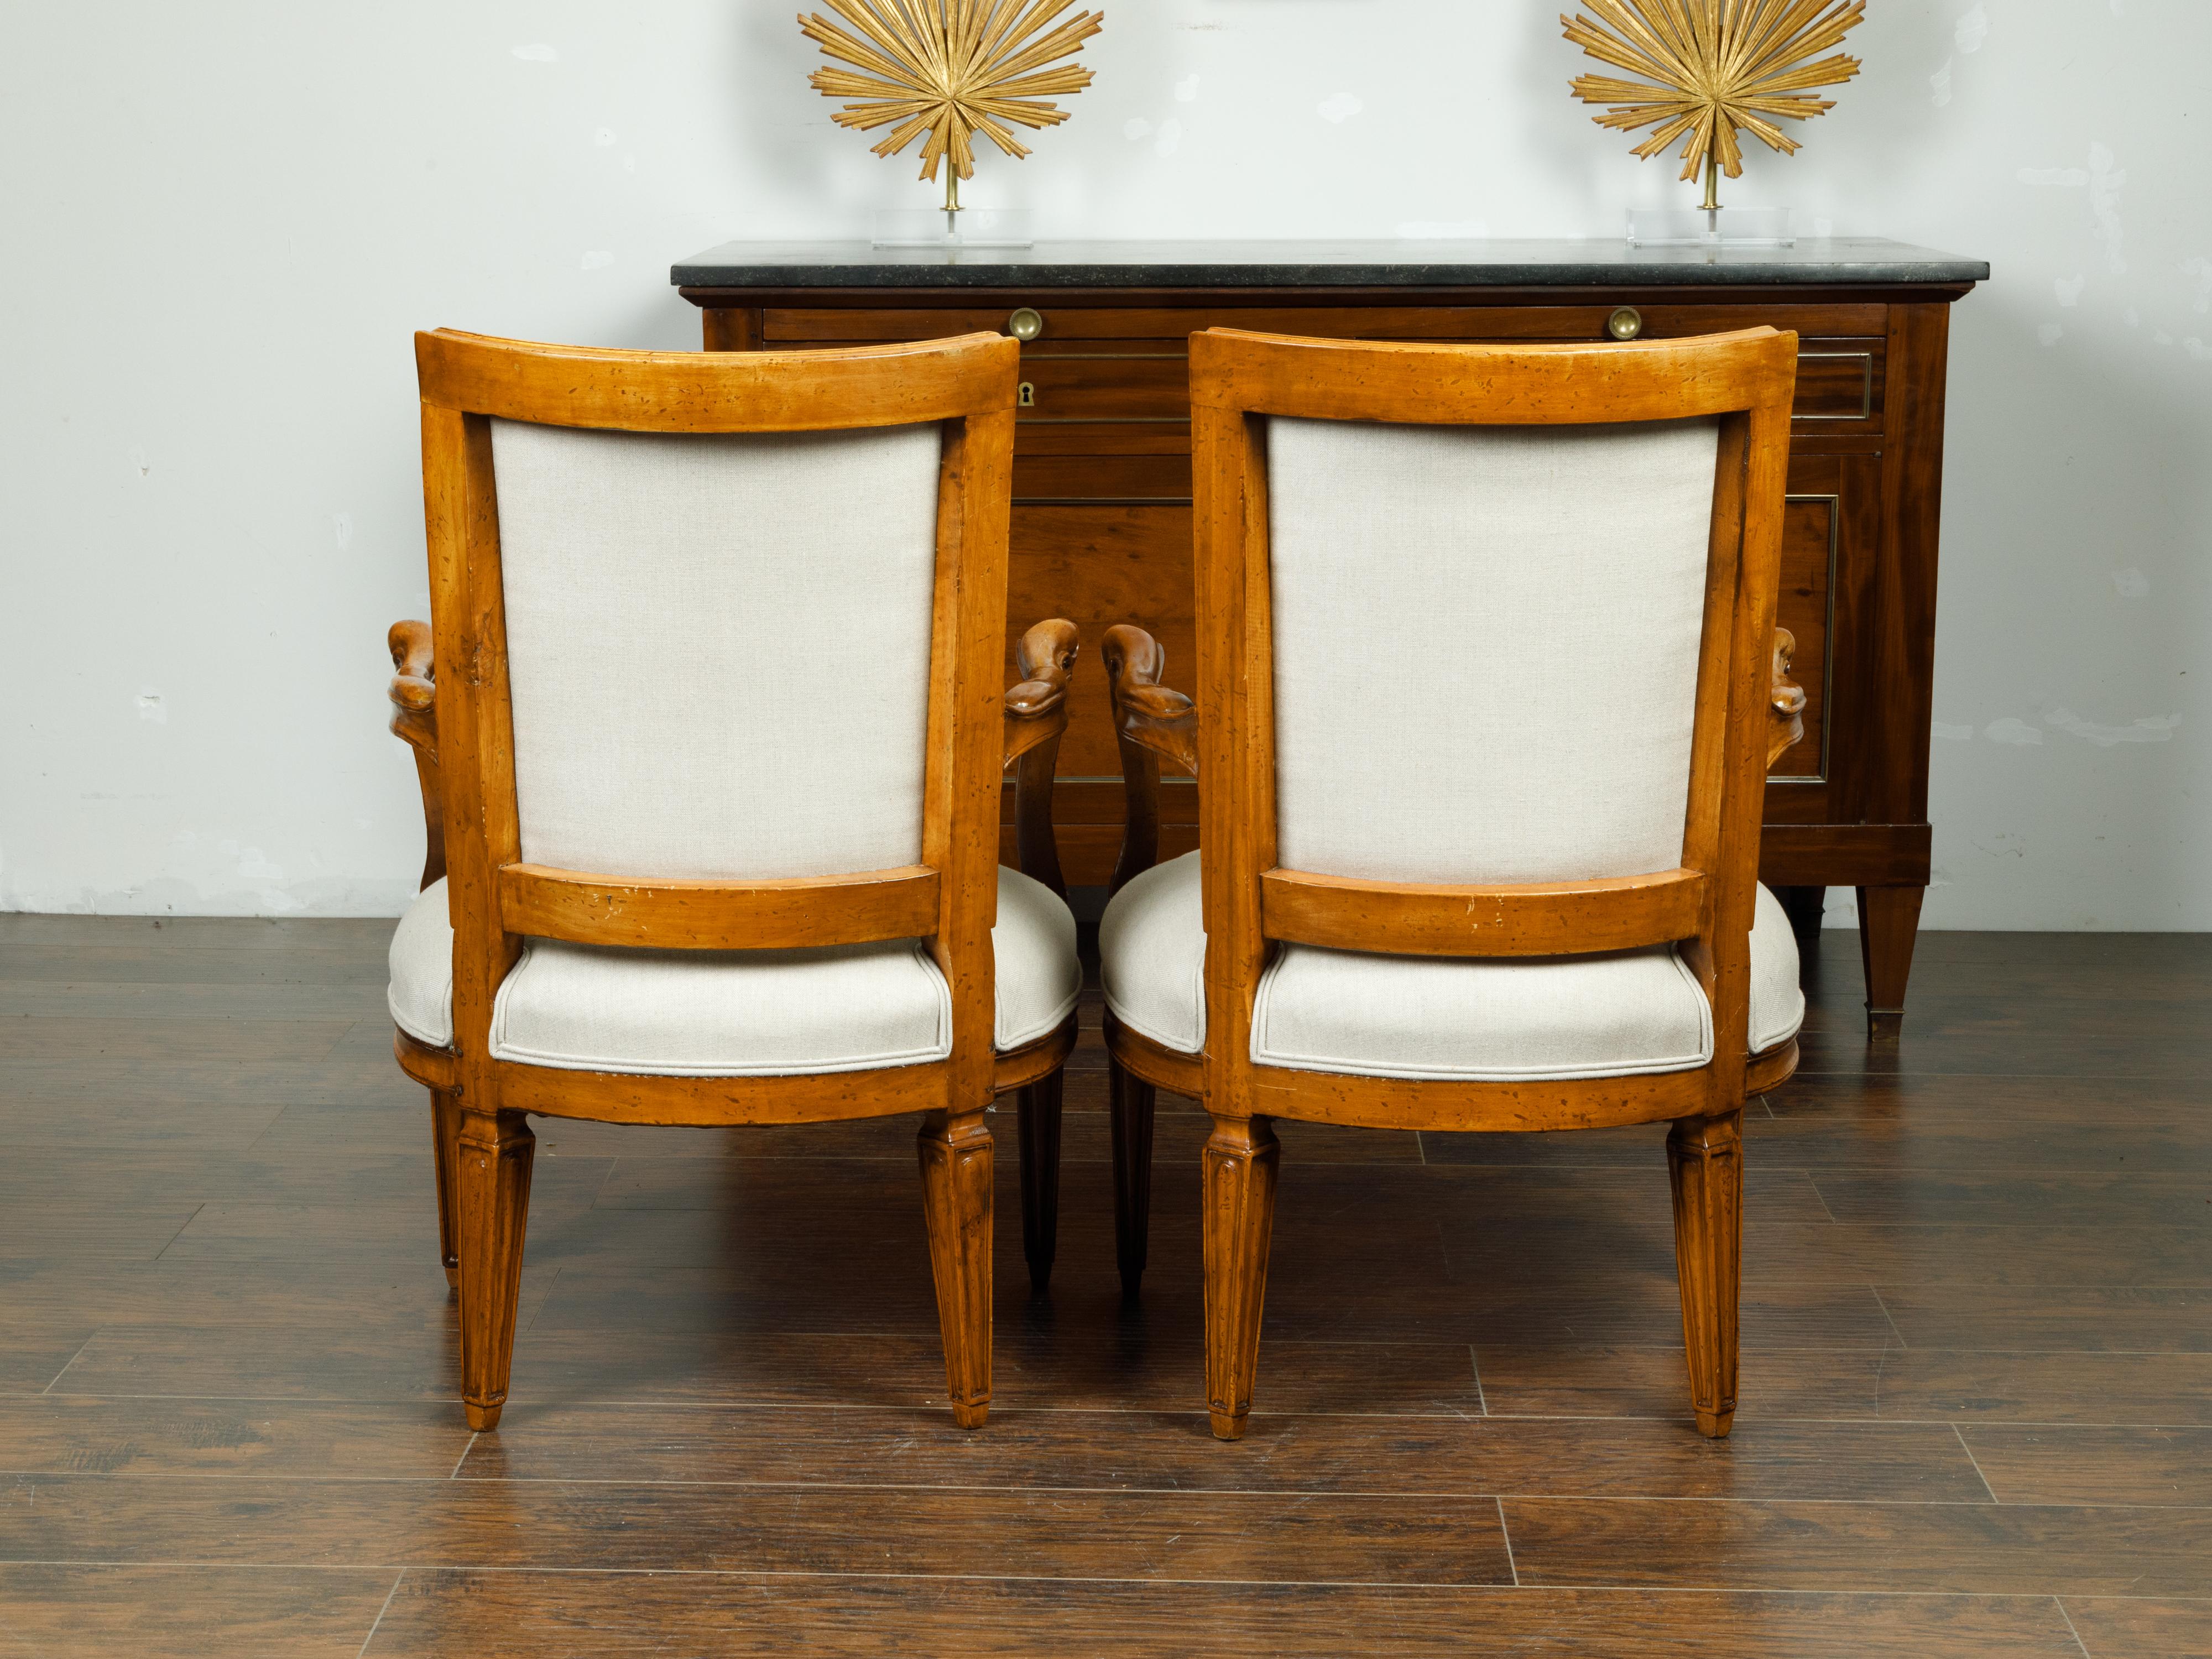 A pair of Italian walnut armchairs from the mid 19th century, with tapered legs and new upholstery. Created in Italy during the third quarter of the 19th century, each of this pair of walnut armchairs features a curving back connected to two sinuous